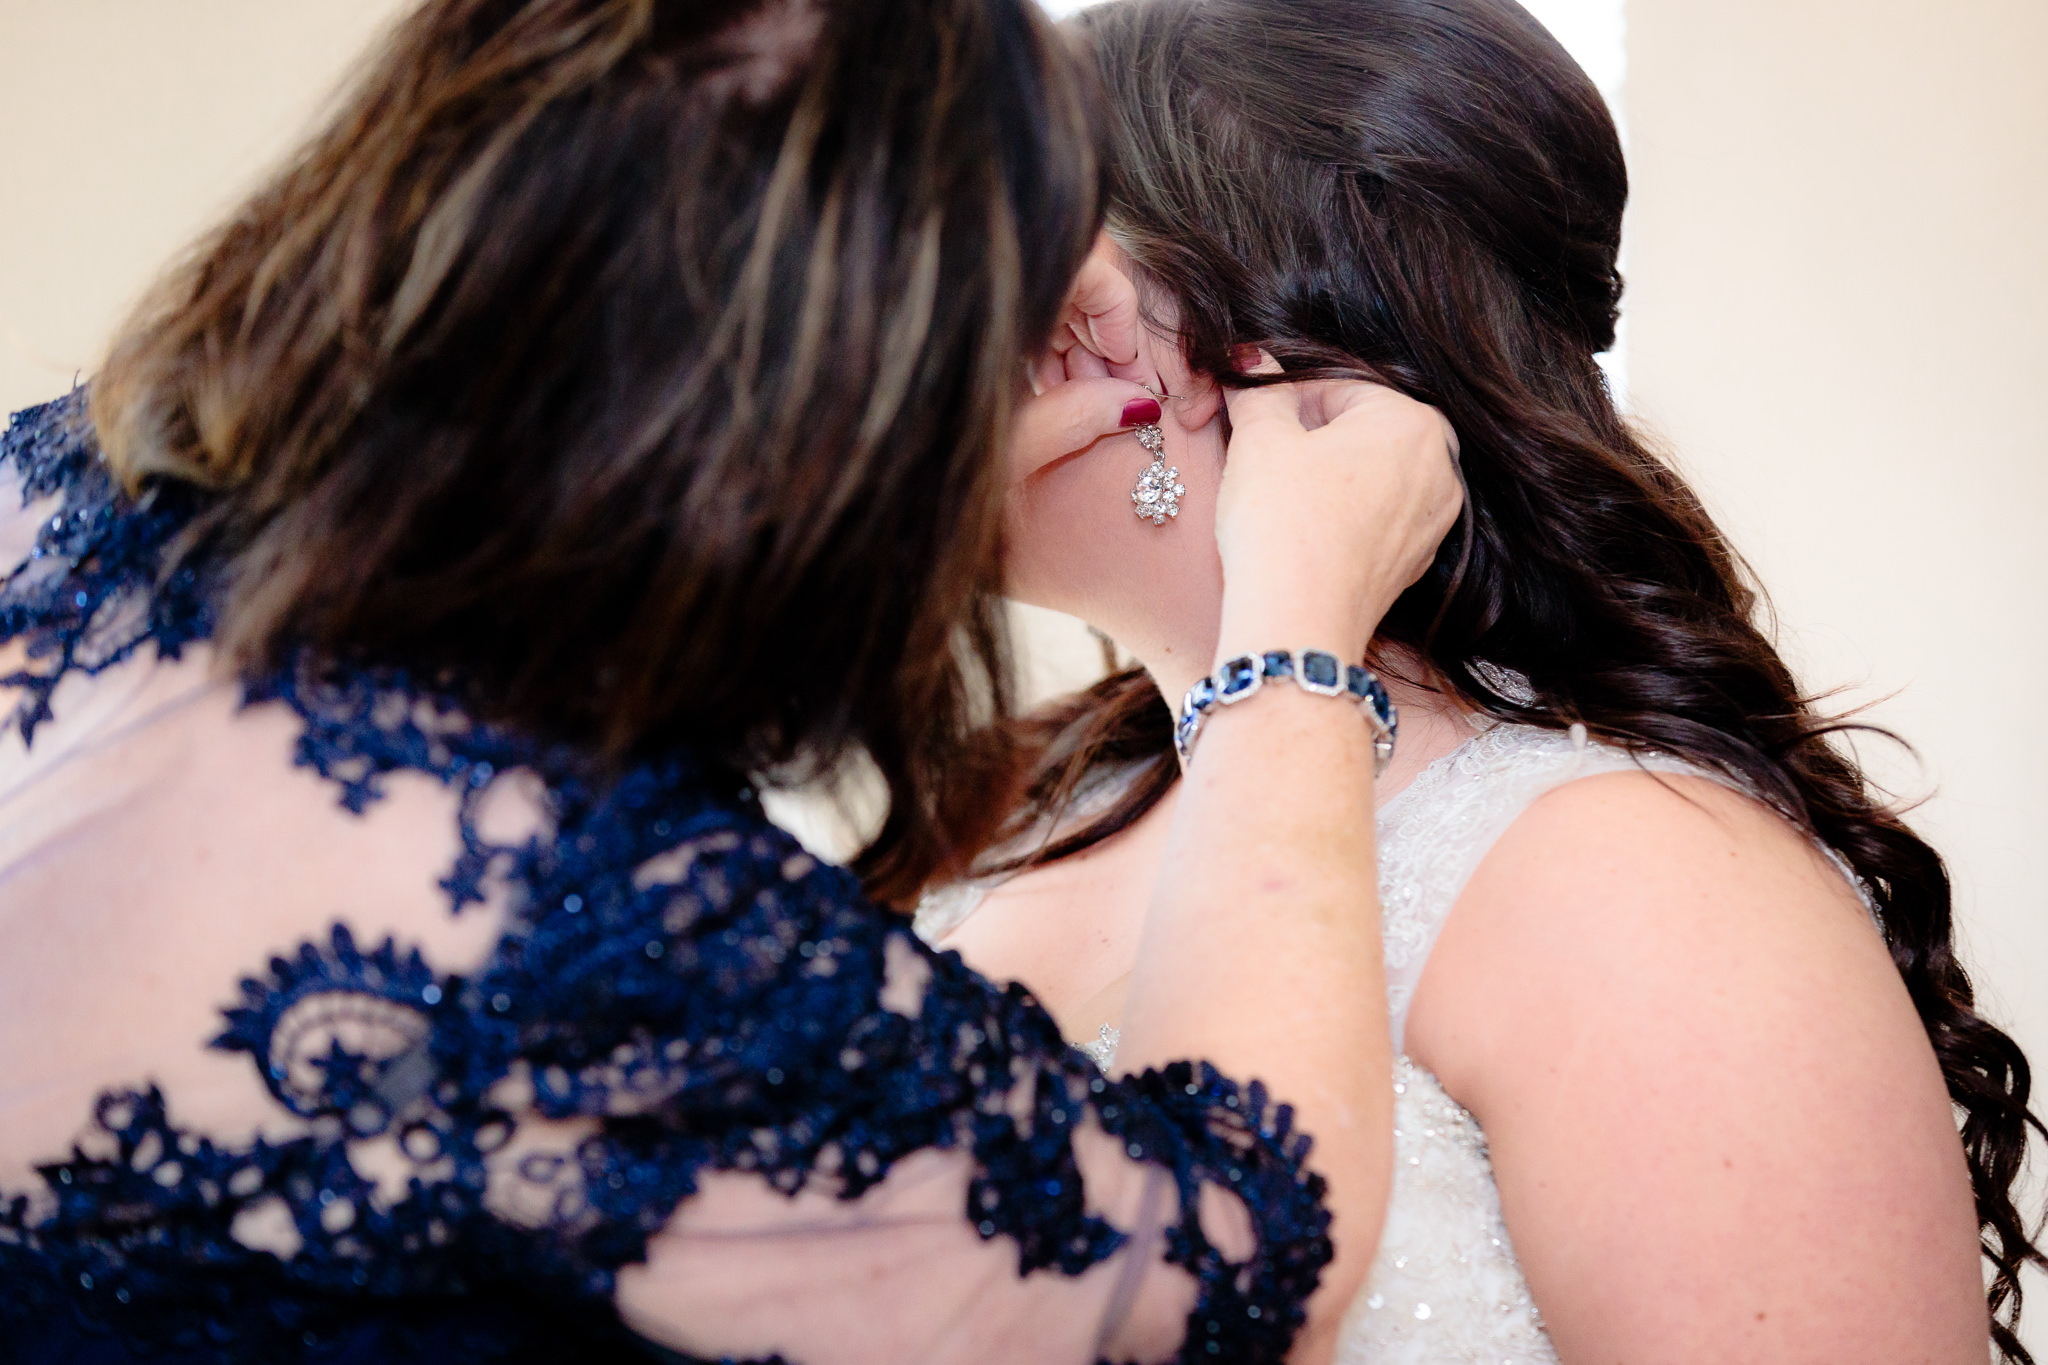 Mother of the bride helps put in bride's earrings before her wedding at St. Malachy in Kennedy Township